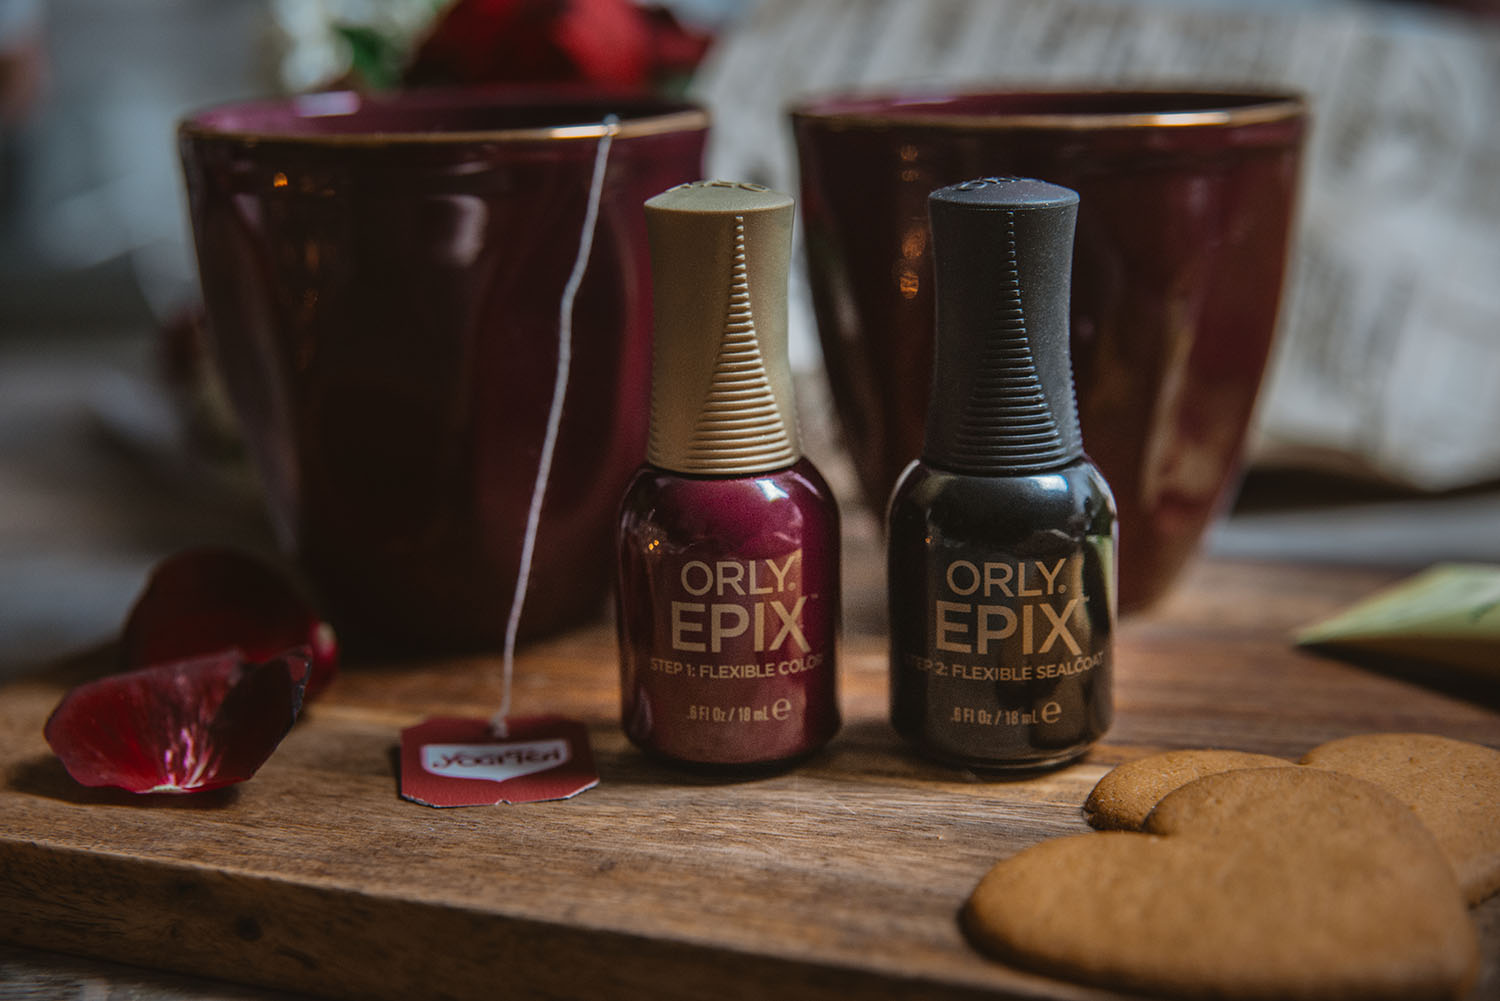 Orly Epix Flexible Color Step 1 & Step 2